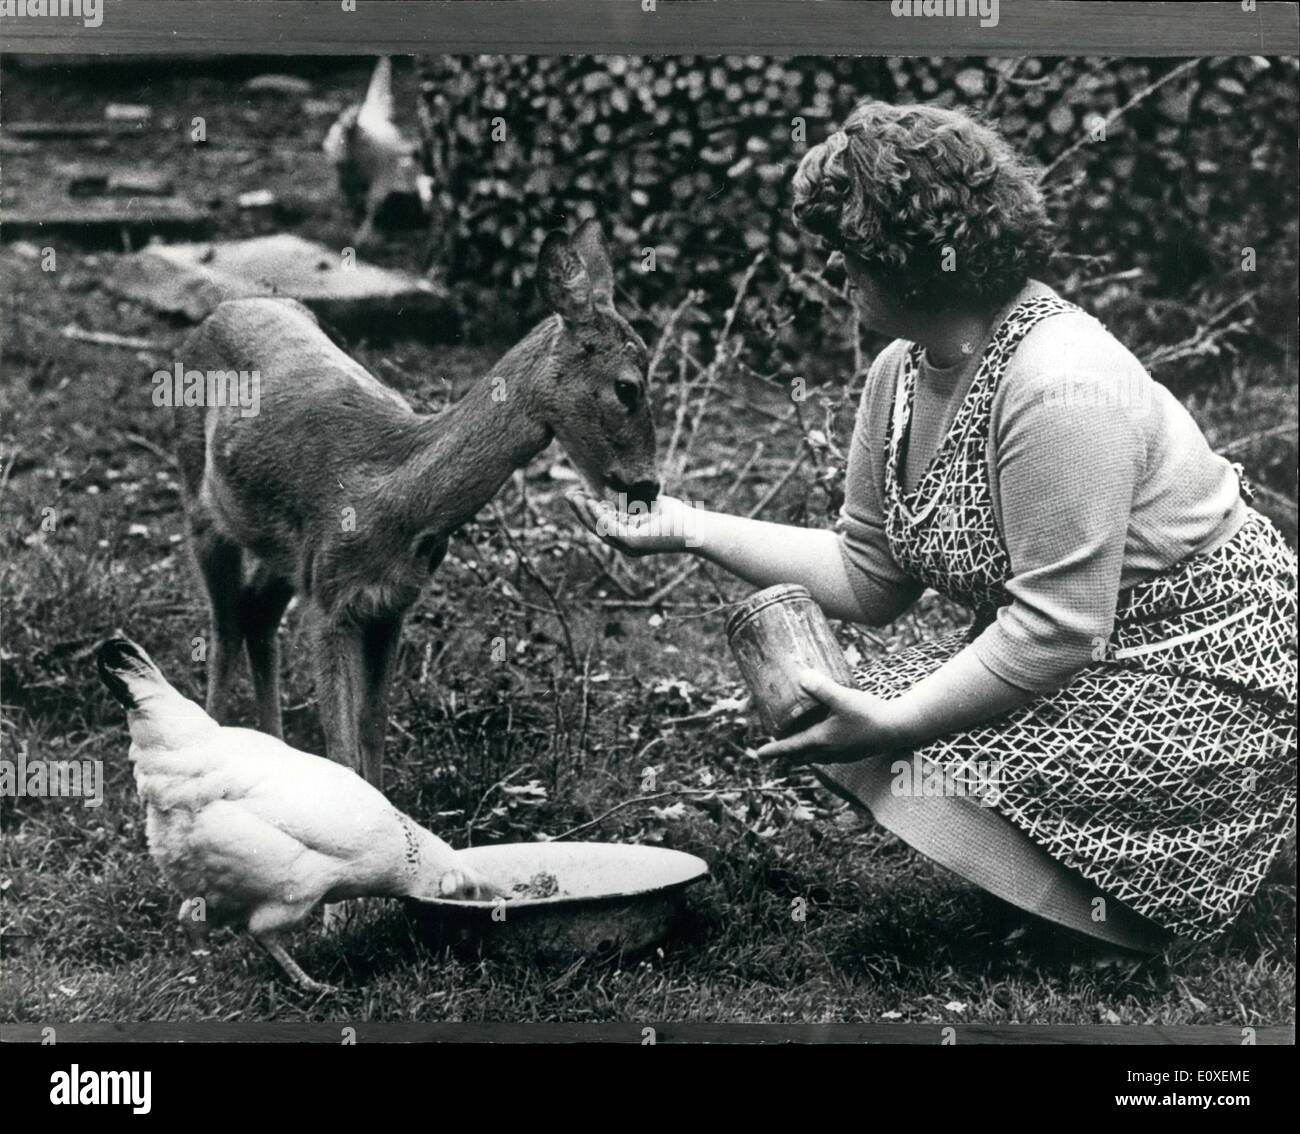 Aug. 08, 1966 - Roe Idyll: Whilst mowing grass last year, cooperative farmers wounded a little fawn. Hunters from Hradistko near Zeretice - not far from Joioni (East Bohemia) - took care of the animal and bandaged the injured leg. Mr and Mrs. Slivka took the fawn into their farmyard and nursed it back to health. In the Autumn, they set the now grown up roe free and it disappear into the woods. But to Mr. and Mrs. Slivka's surprise a month later Zuzka (which they had named her), was waiting in front of their garden fence to be let in Stock Photo